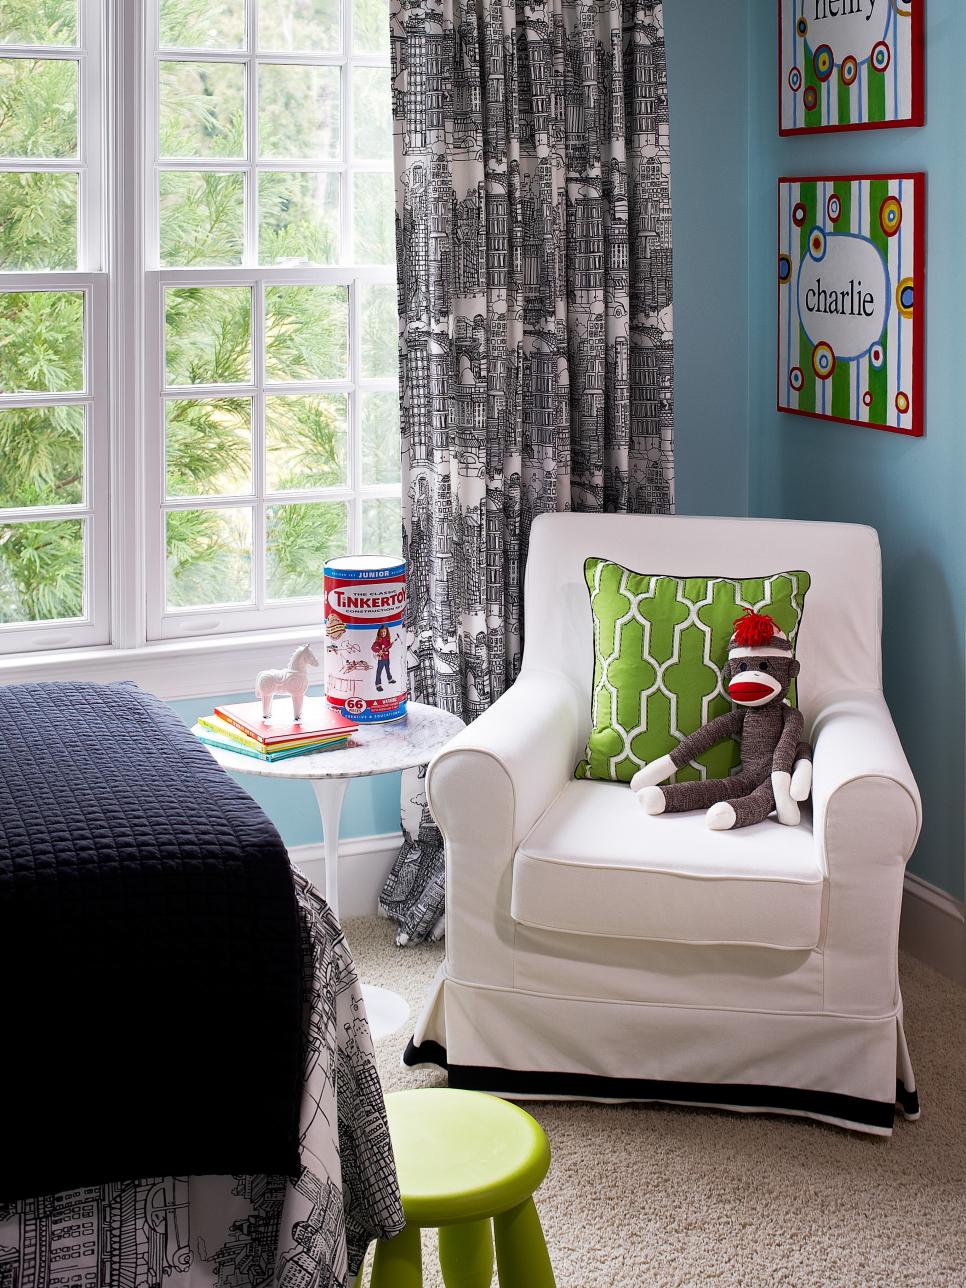 Kid's Room with Furniture and Curtains